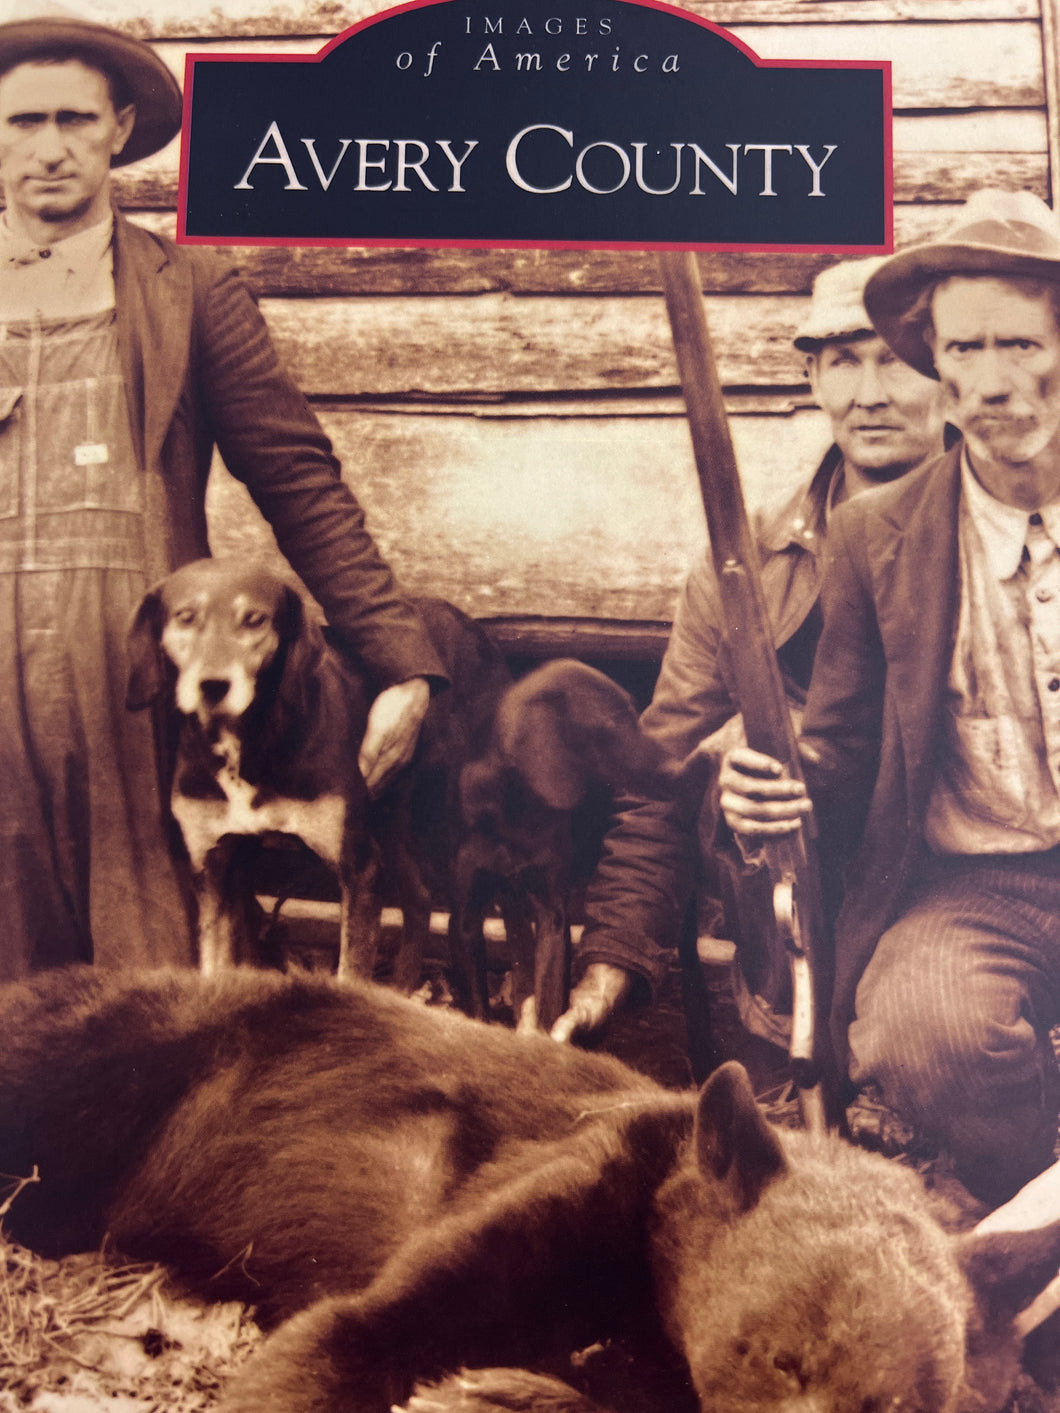 AVERY COUNTY BOOK